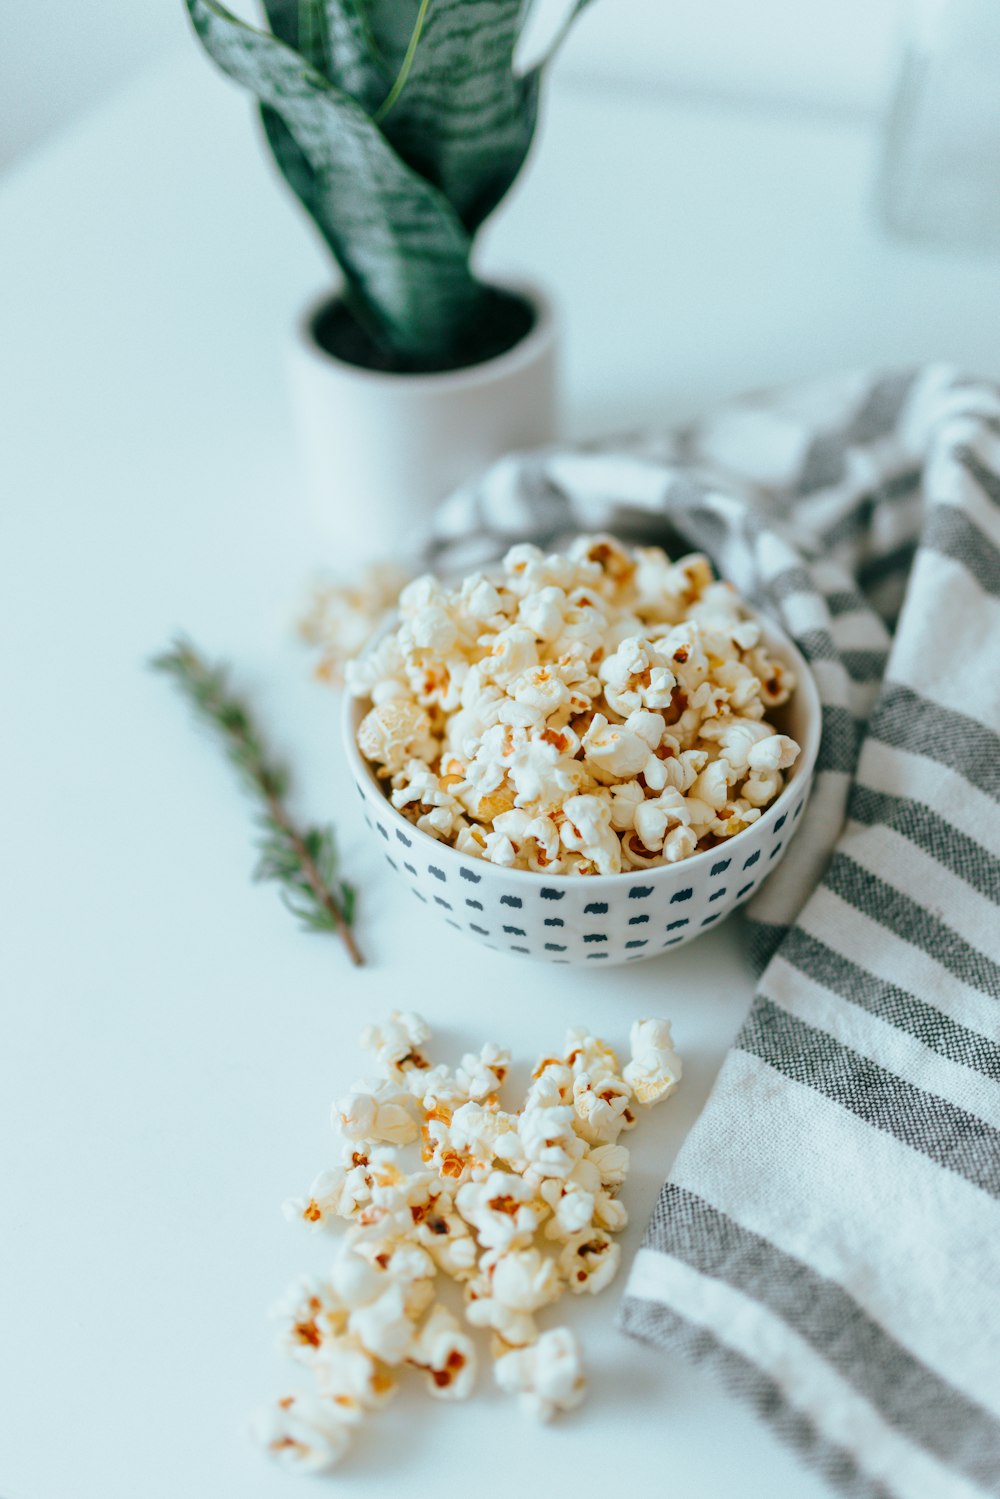 white and black checkered textile beside white ceramic bowl with popcorn